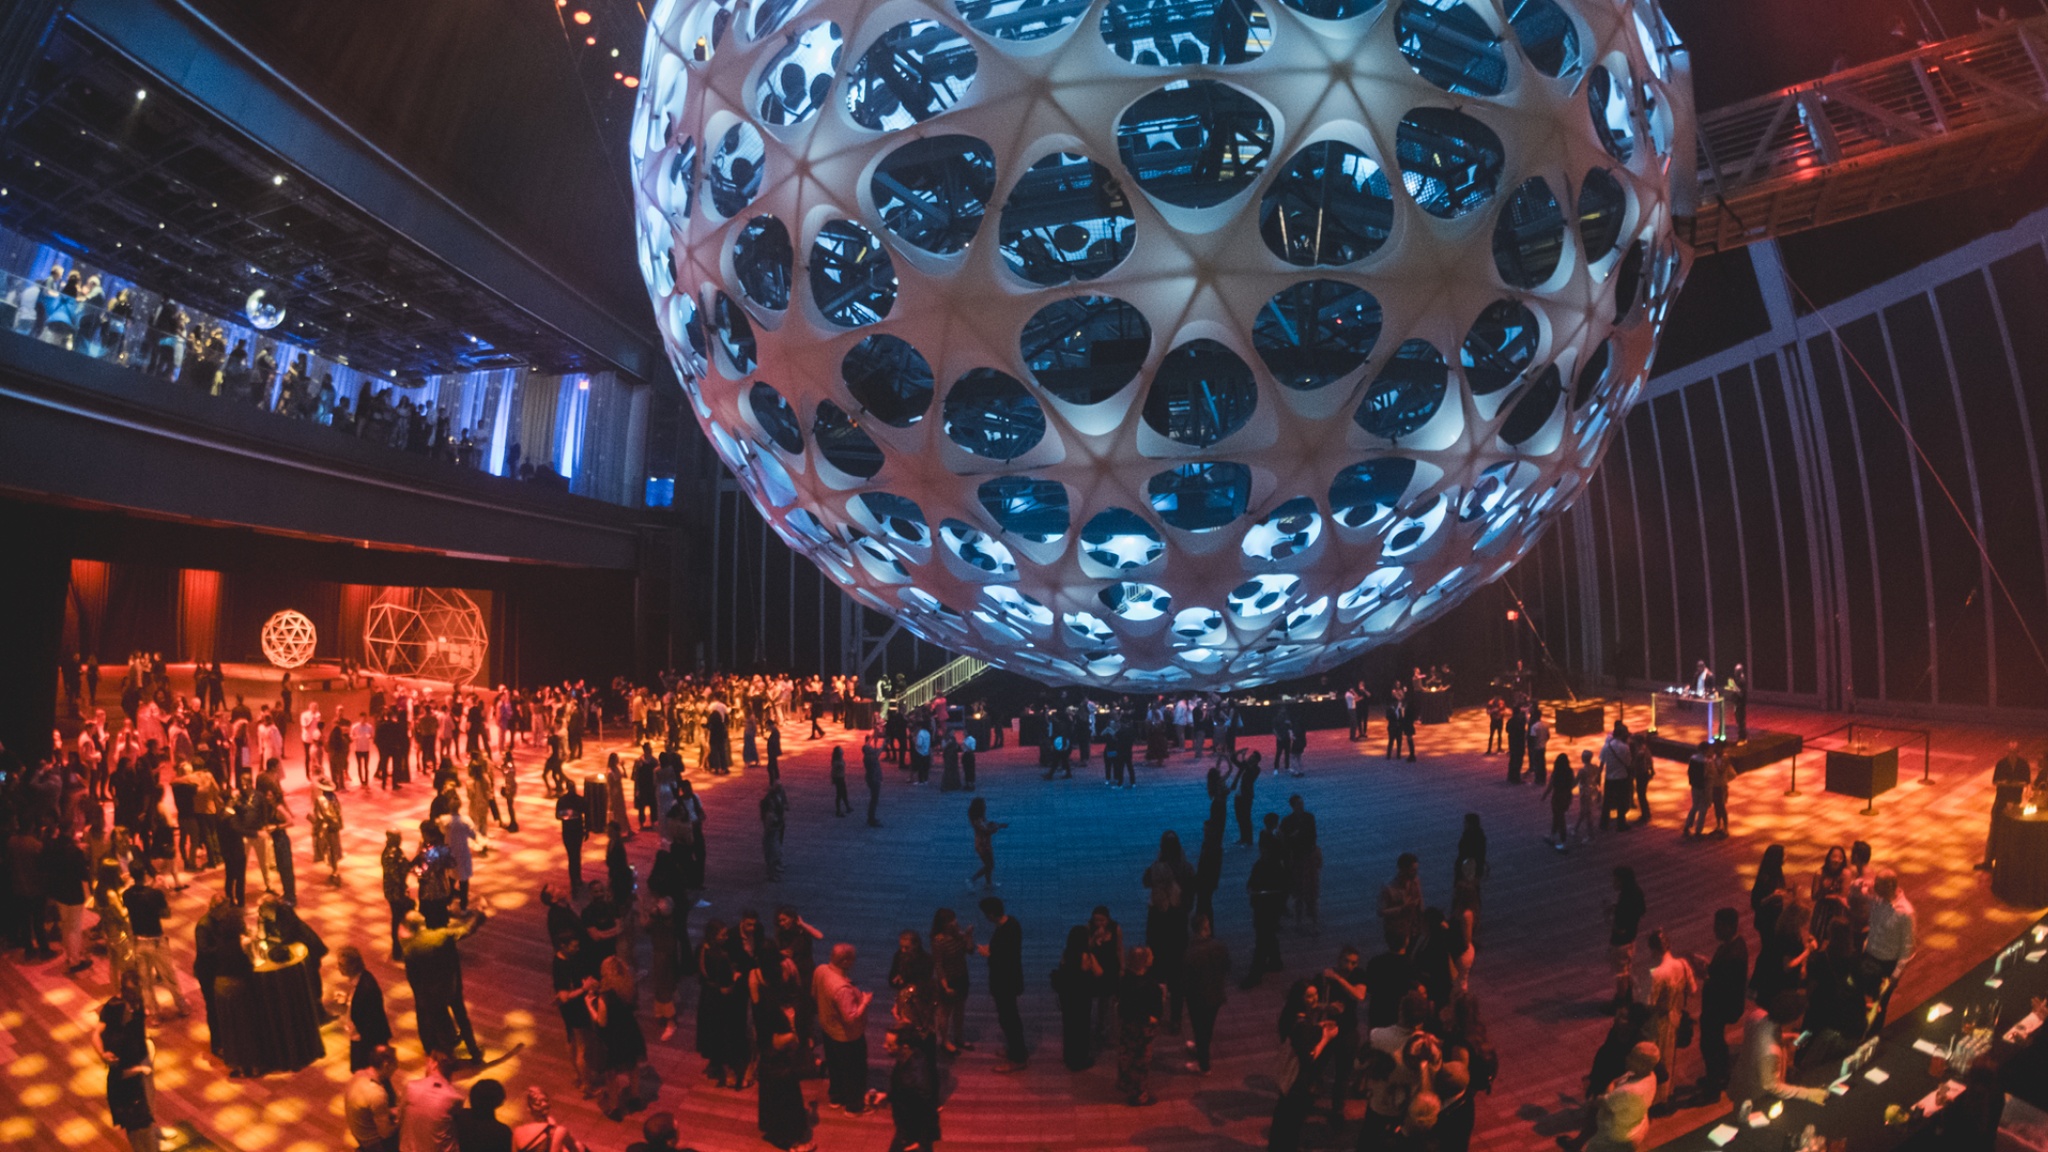 A crowd gathers beneath a large spherical concert hall suspended in air in a vast performance space. The sphere can be seen into through large apertures that make it resemble a wiffle ball. It is lit in pale blue light, and golden light illuminates the ground around its edges. 